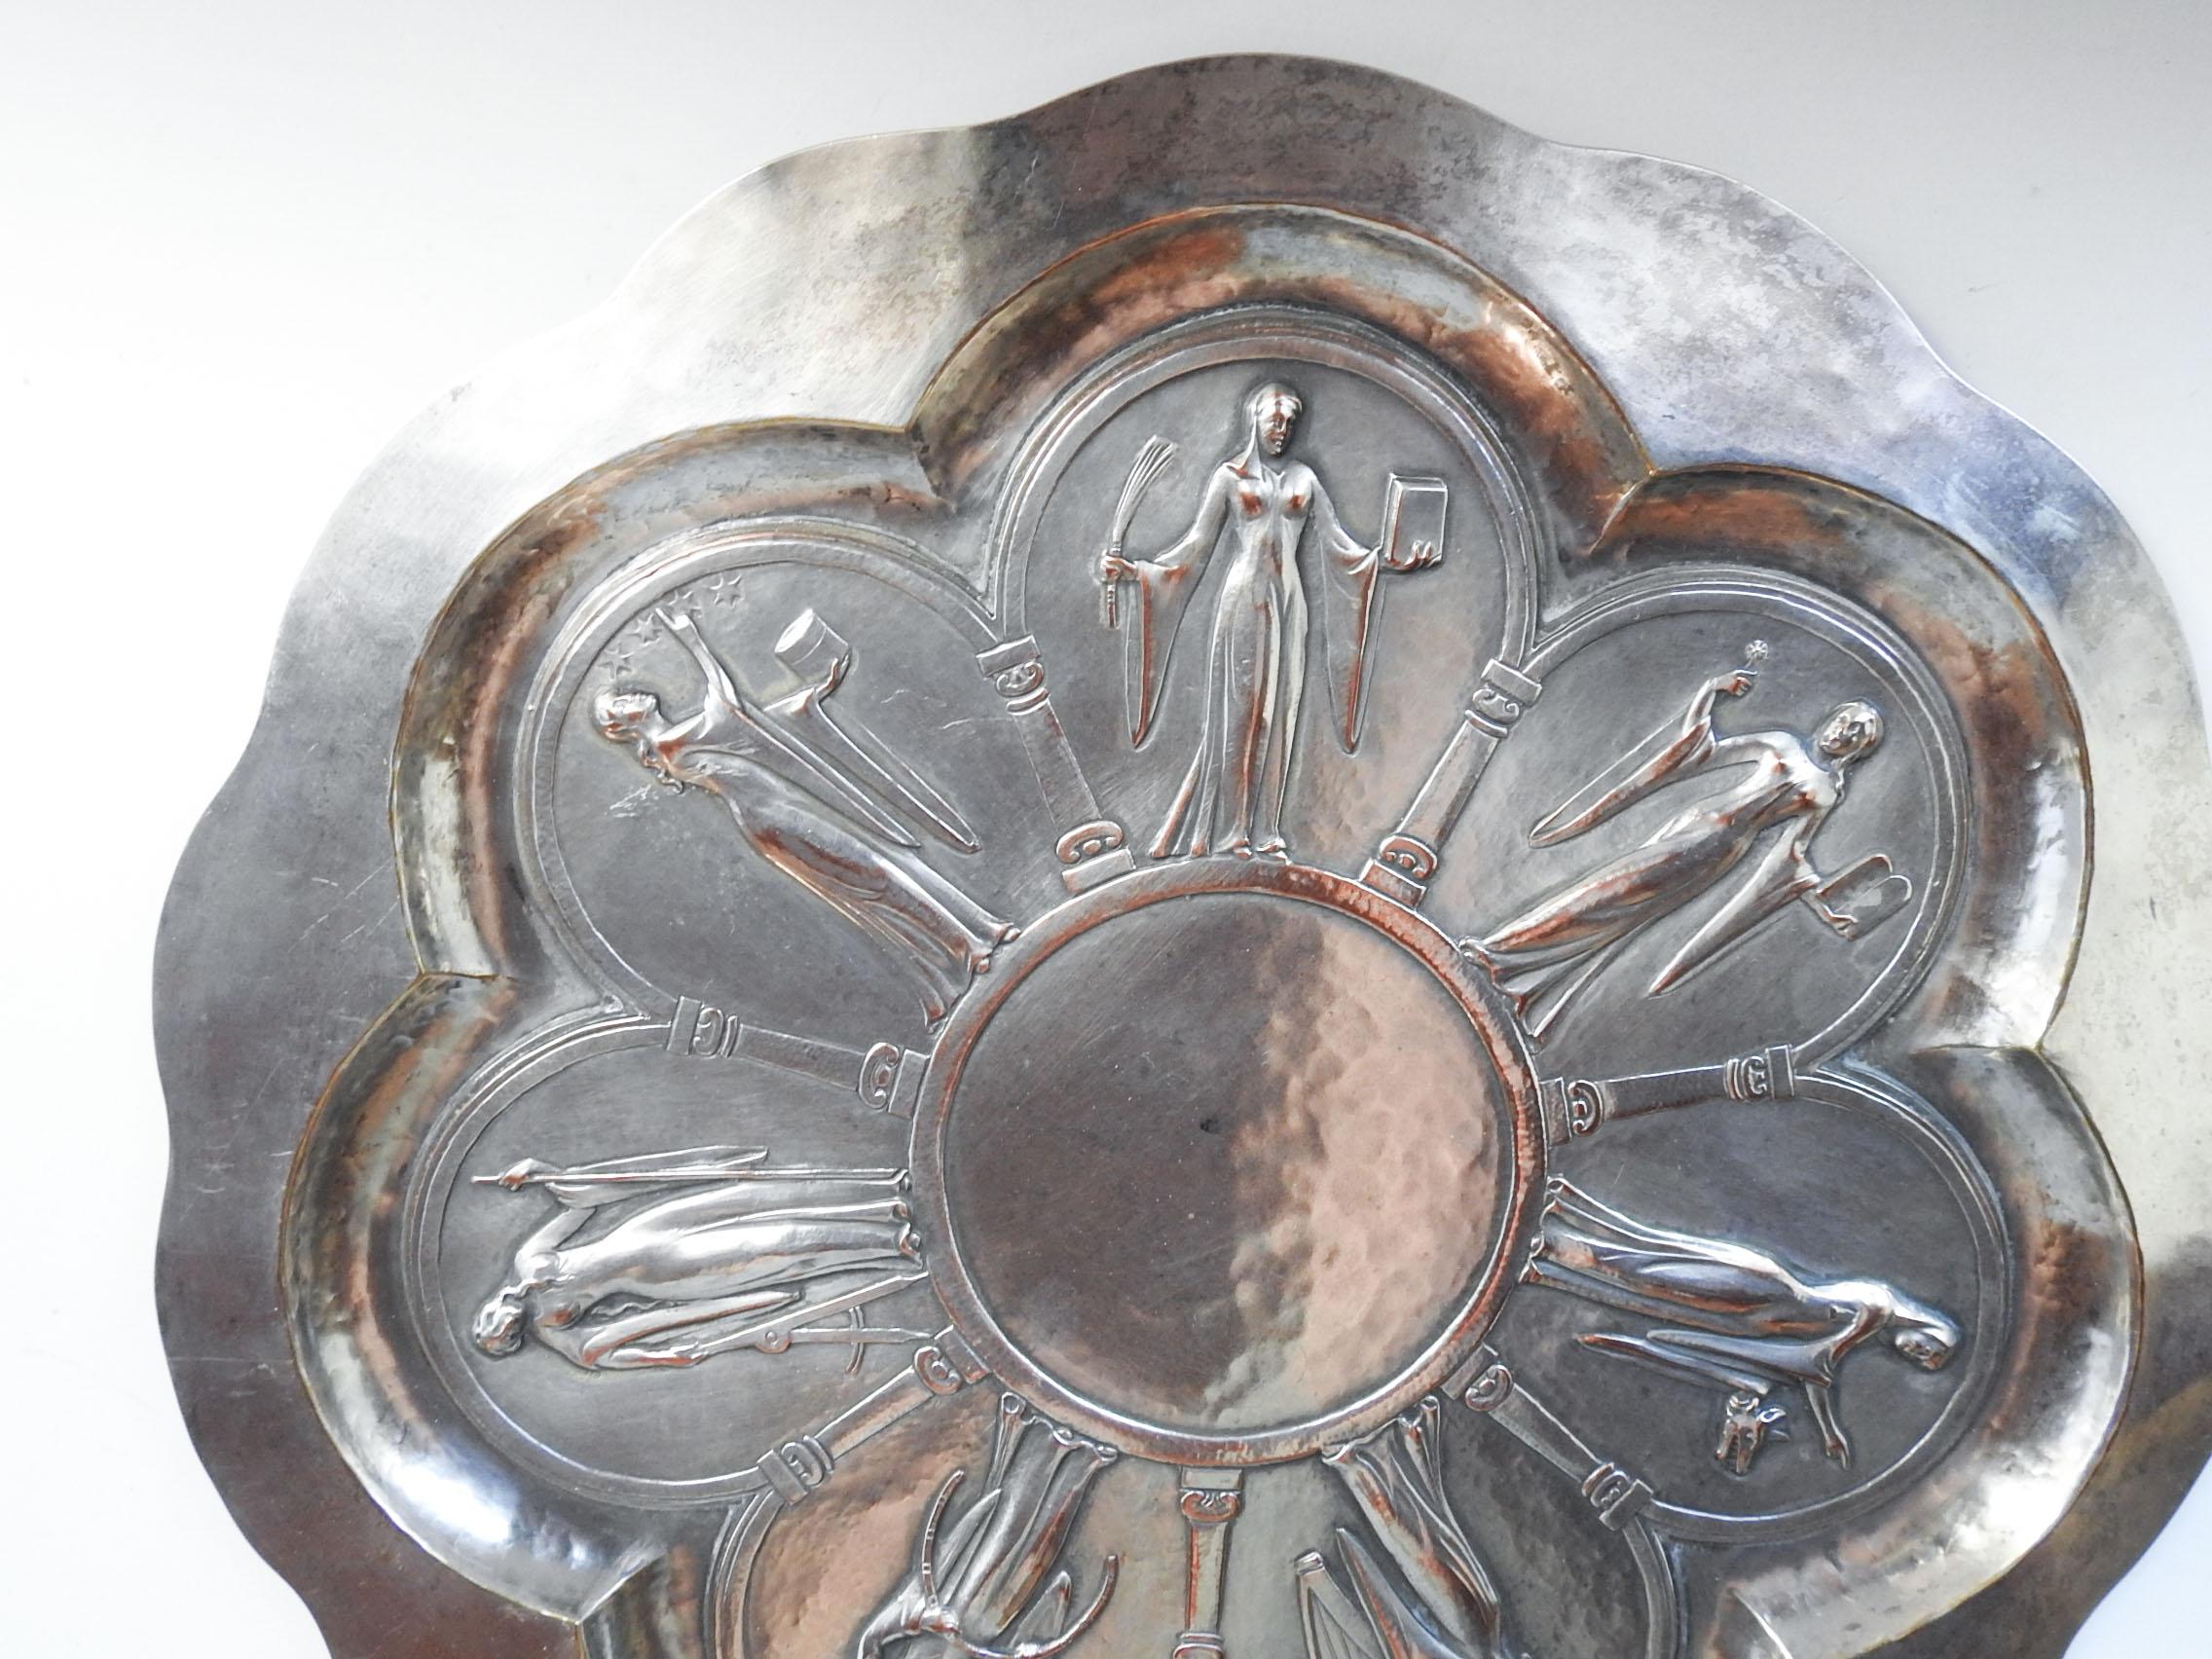 Art Deco silverplate tray featuring the 7 muses. No markings, hand hammered body silver plate with cast center decoration which is silver over copper. Each figure is 3